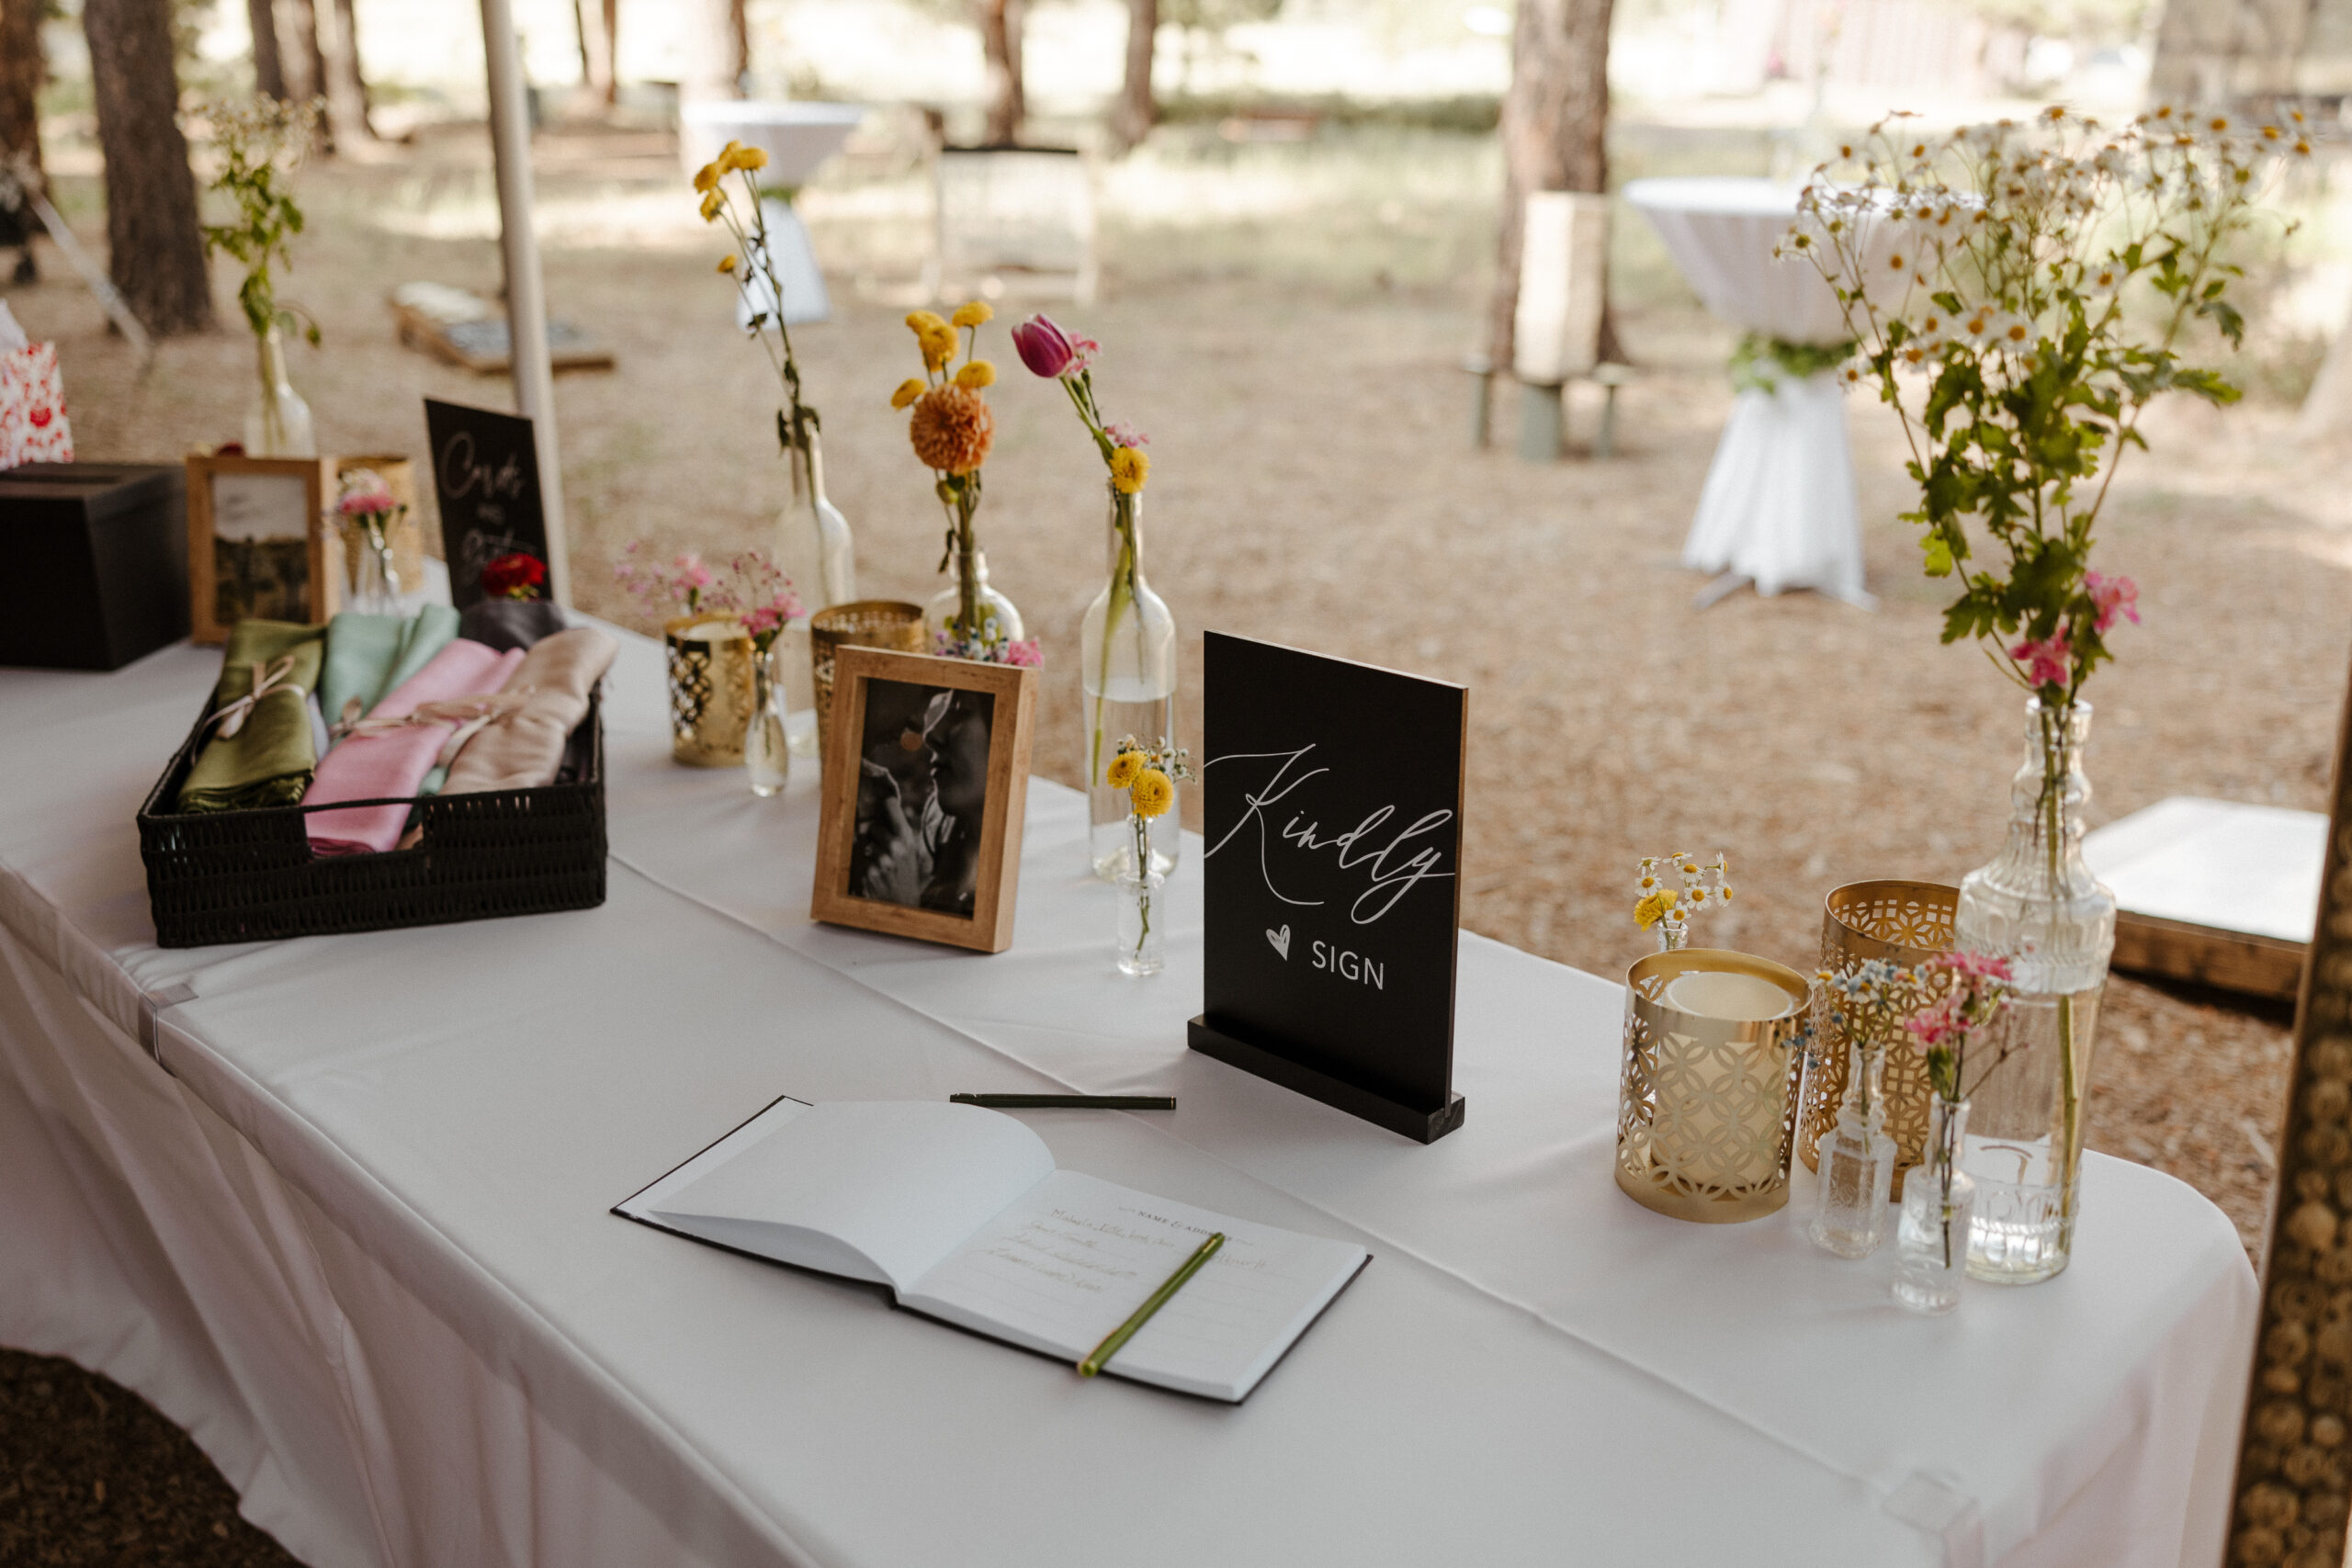 wedding guest book and flowers in vases